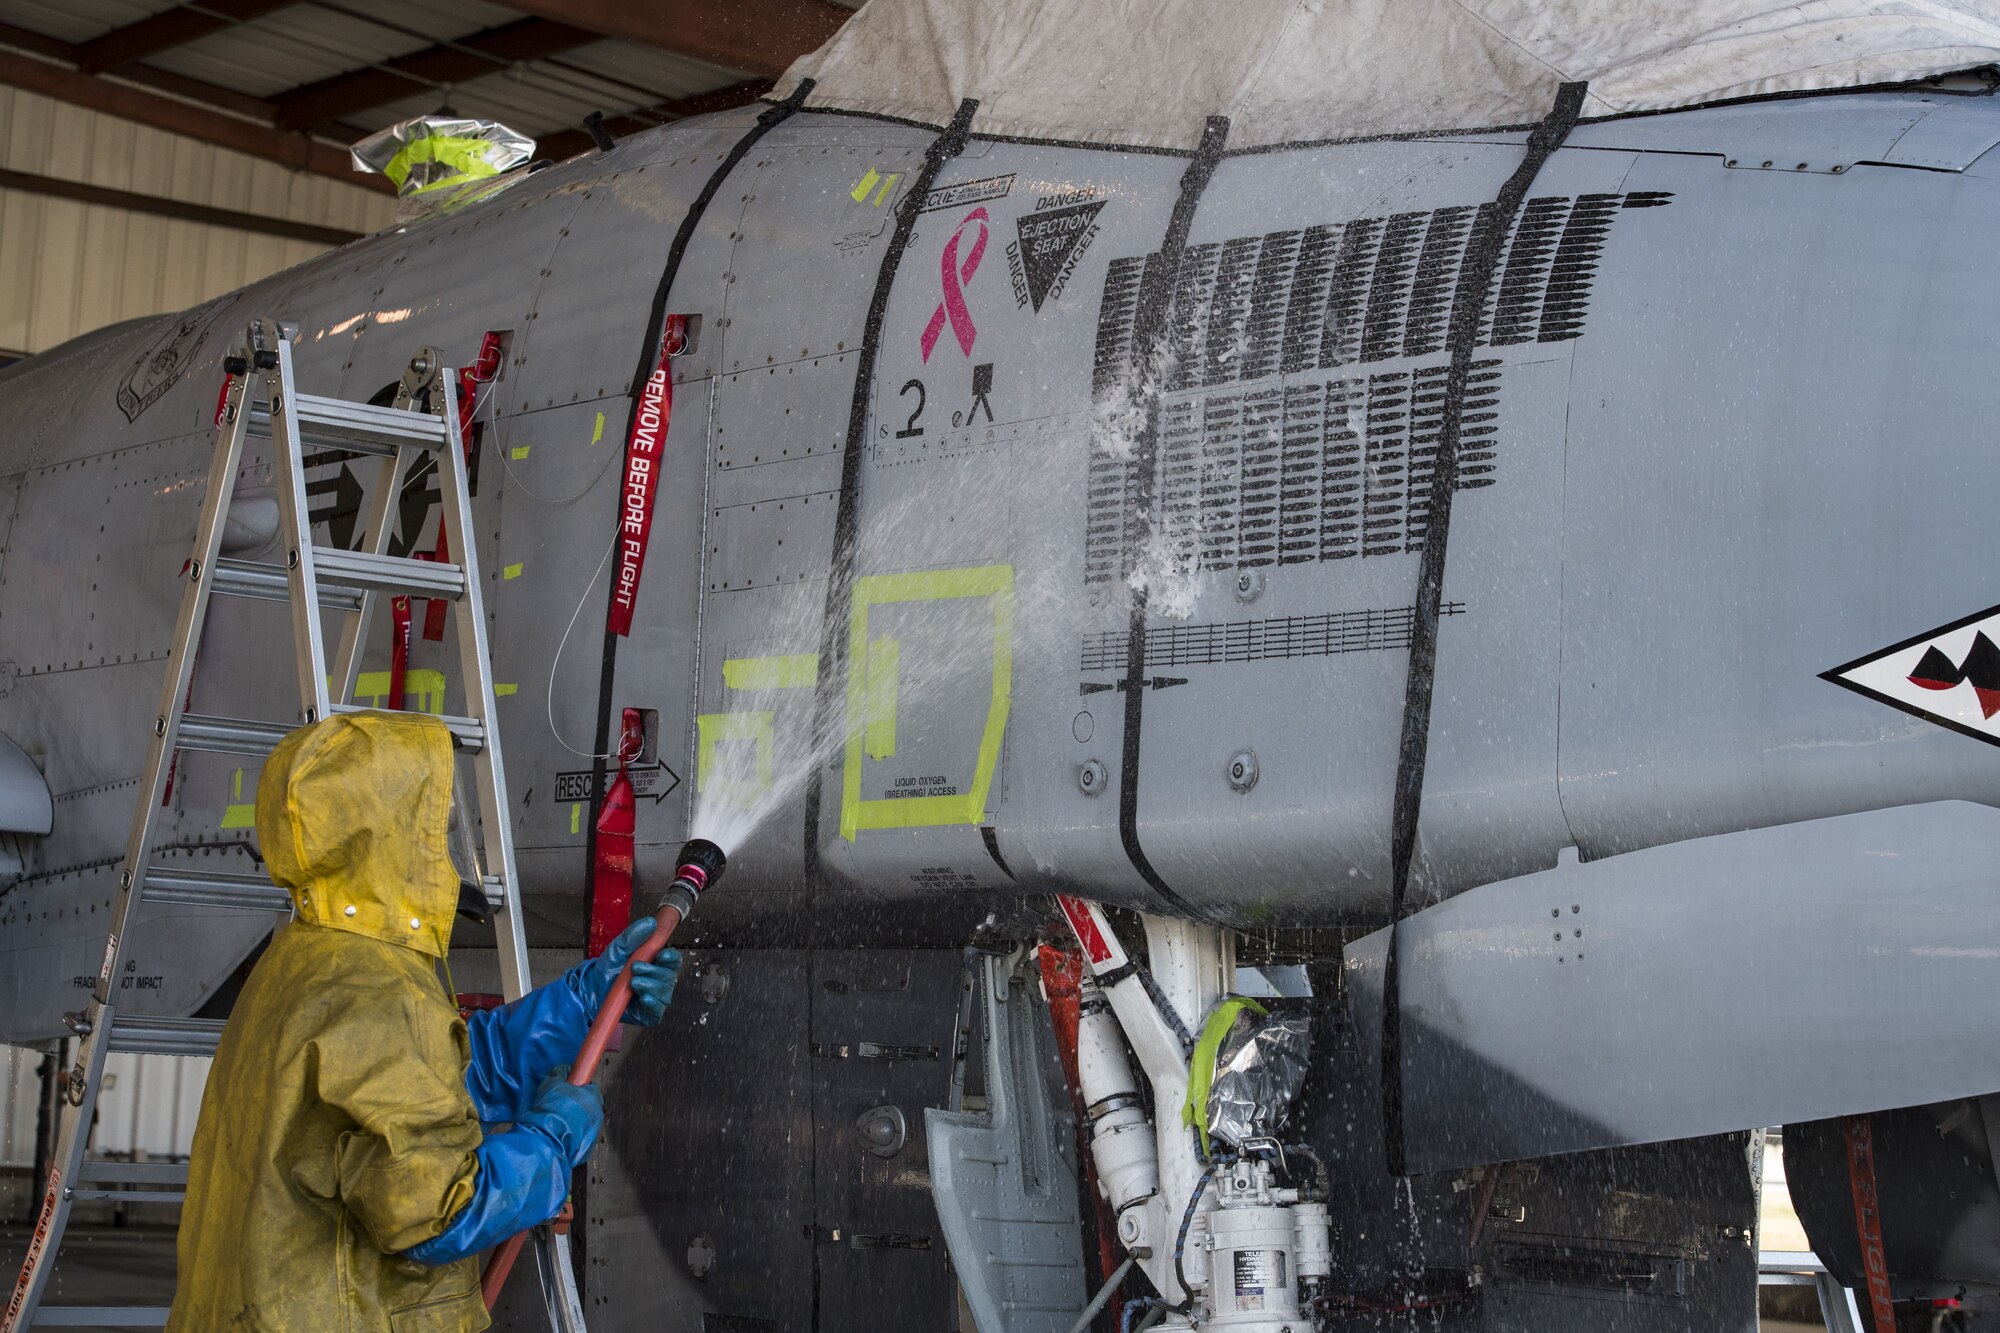 Senior Airman Michael Atkinson, 74th Aircraft Maintenance Unit dedicated crew chief, sprays the side of an A-10C Thunderbolt II, Feb. 8, 2018, at Moody Air Force Base, Ga. In addition to mechanical and electrical maintenance, A-10’s must be washed every 180 days or approximately 1,000 flying hours in order to control corrosion caused by residue from the gun and engine exhaust. (U.S. Air Force photo by Senior Airman Janiqua P. Robinson)